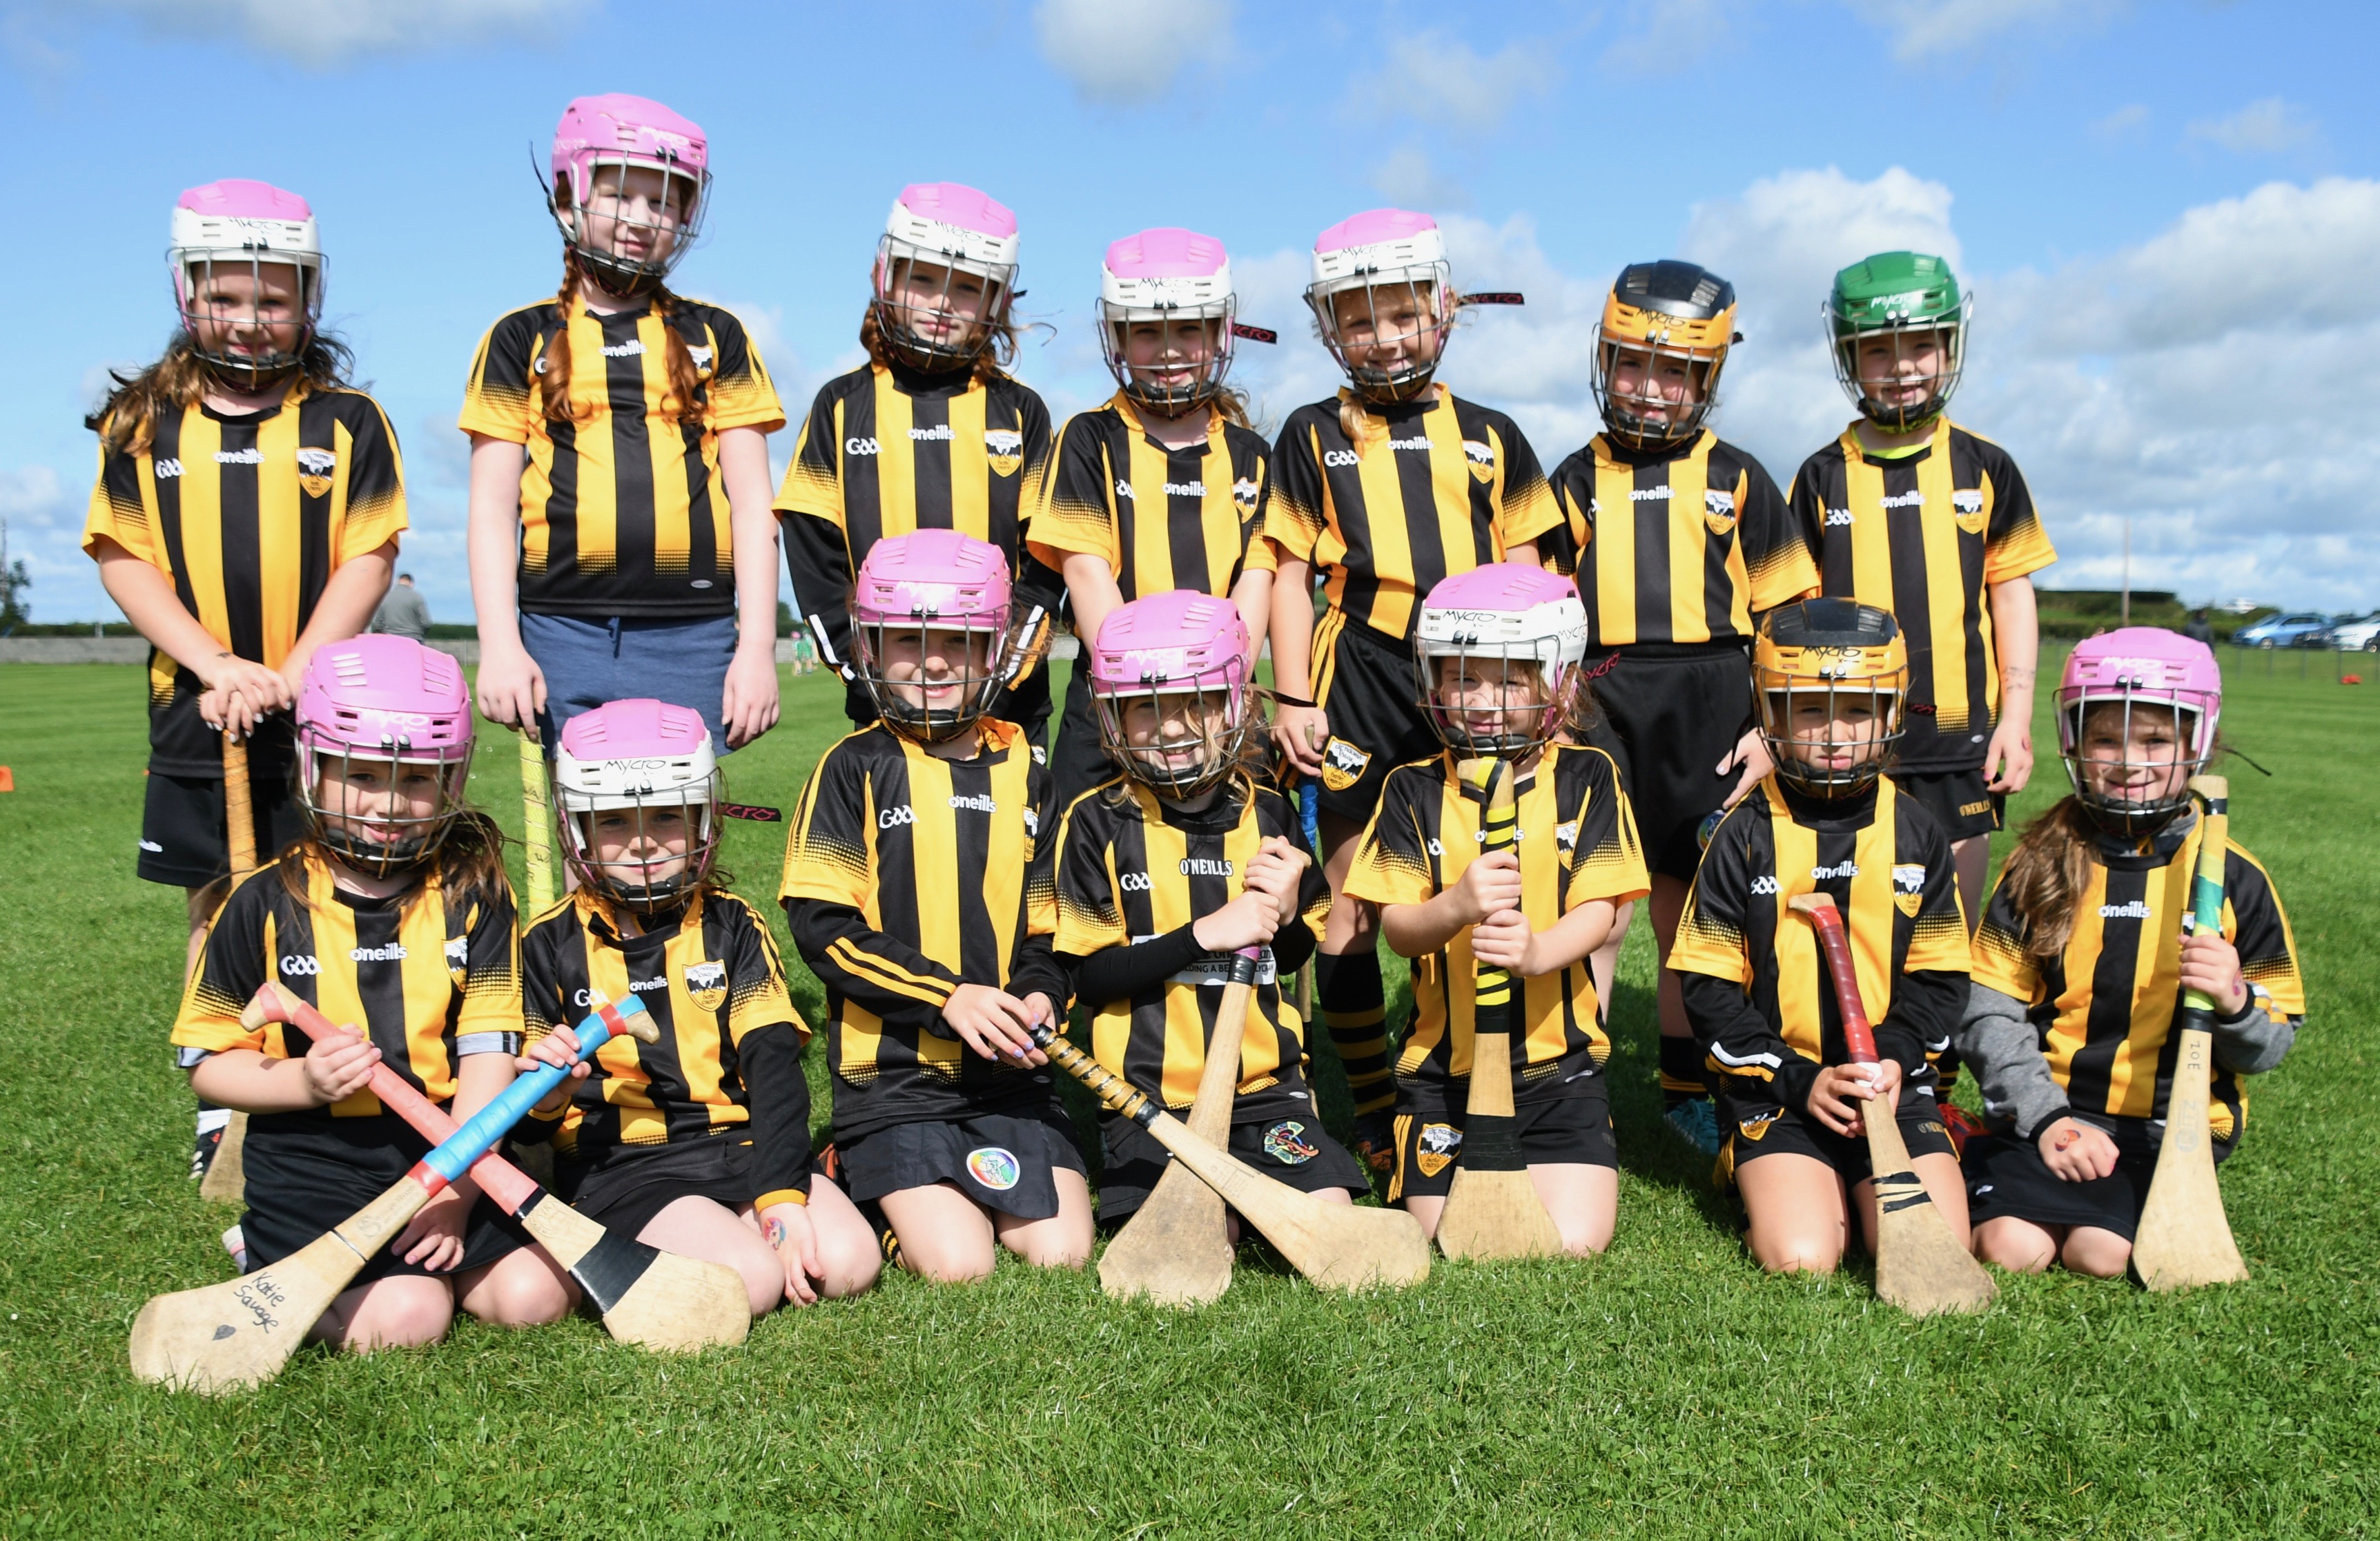 U8 Camogie Blitz is a Great Fun Day Out